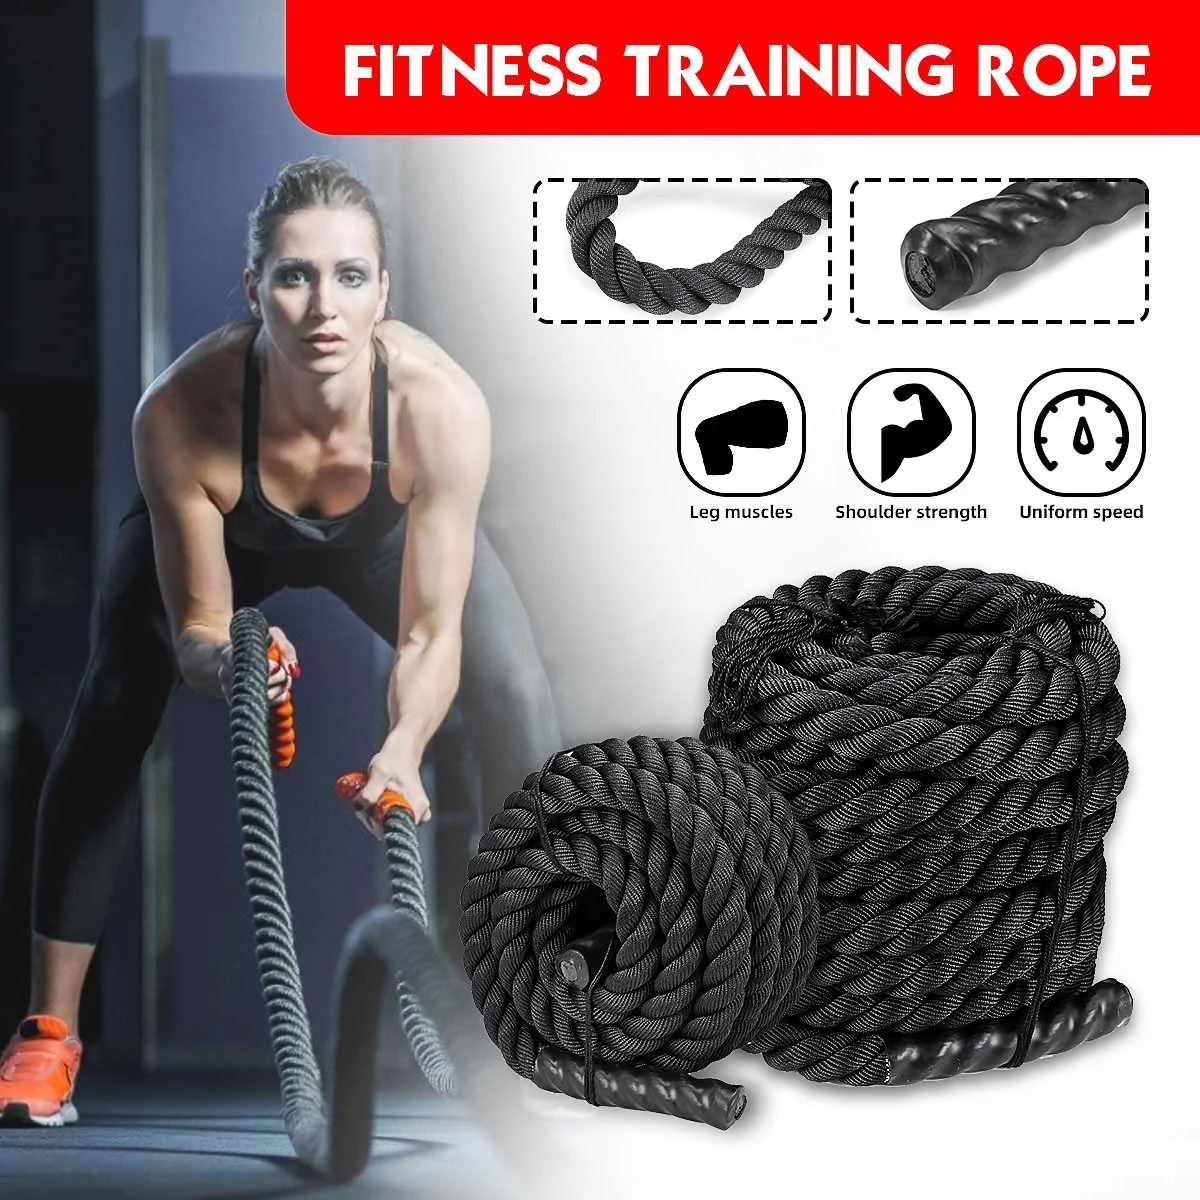 38mmX9m 12m 15m Battle Power Rope Strength Muscle Training Fitness Gym Body Workout For Men Women MMA Fighting Climbing Ropes